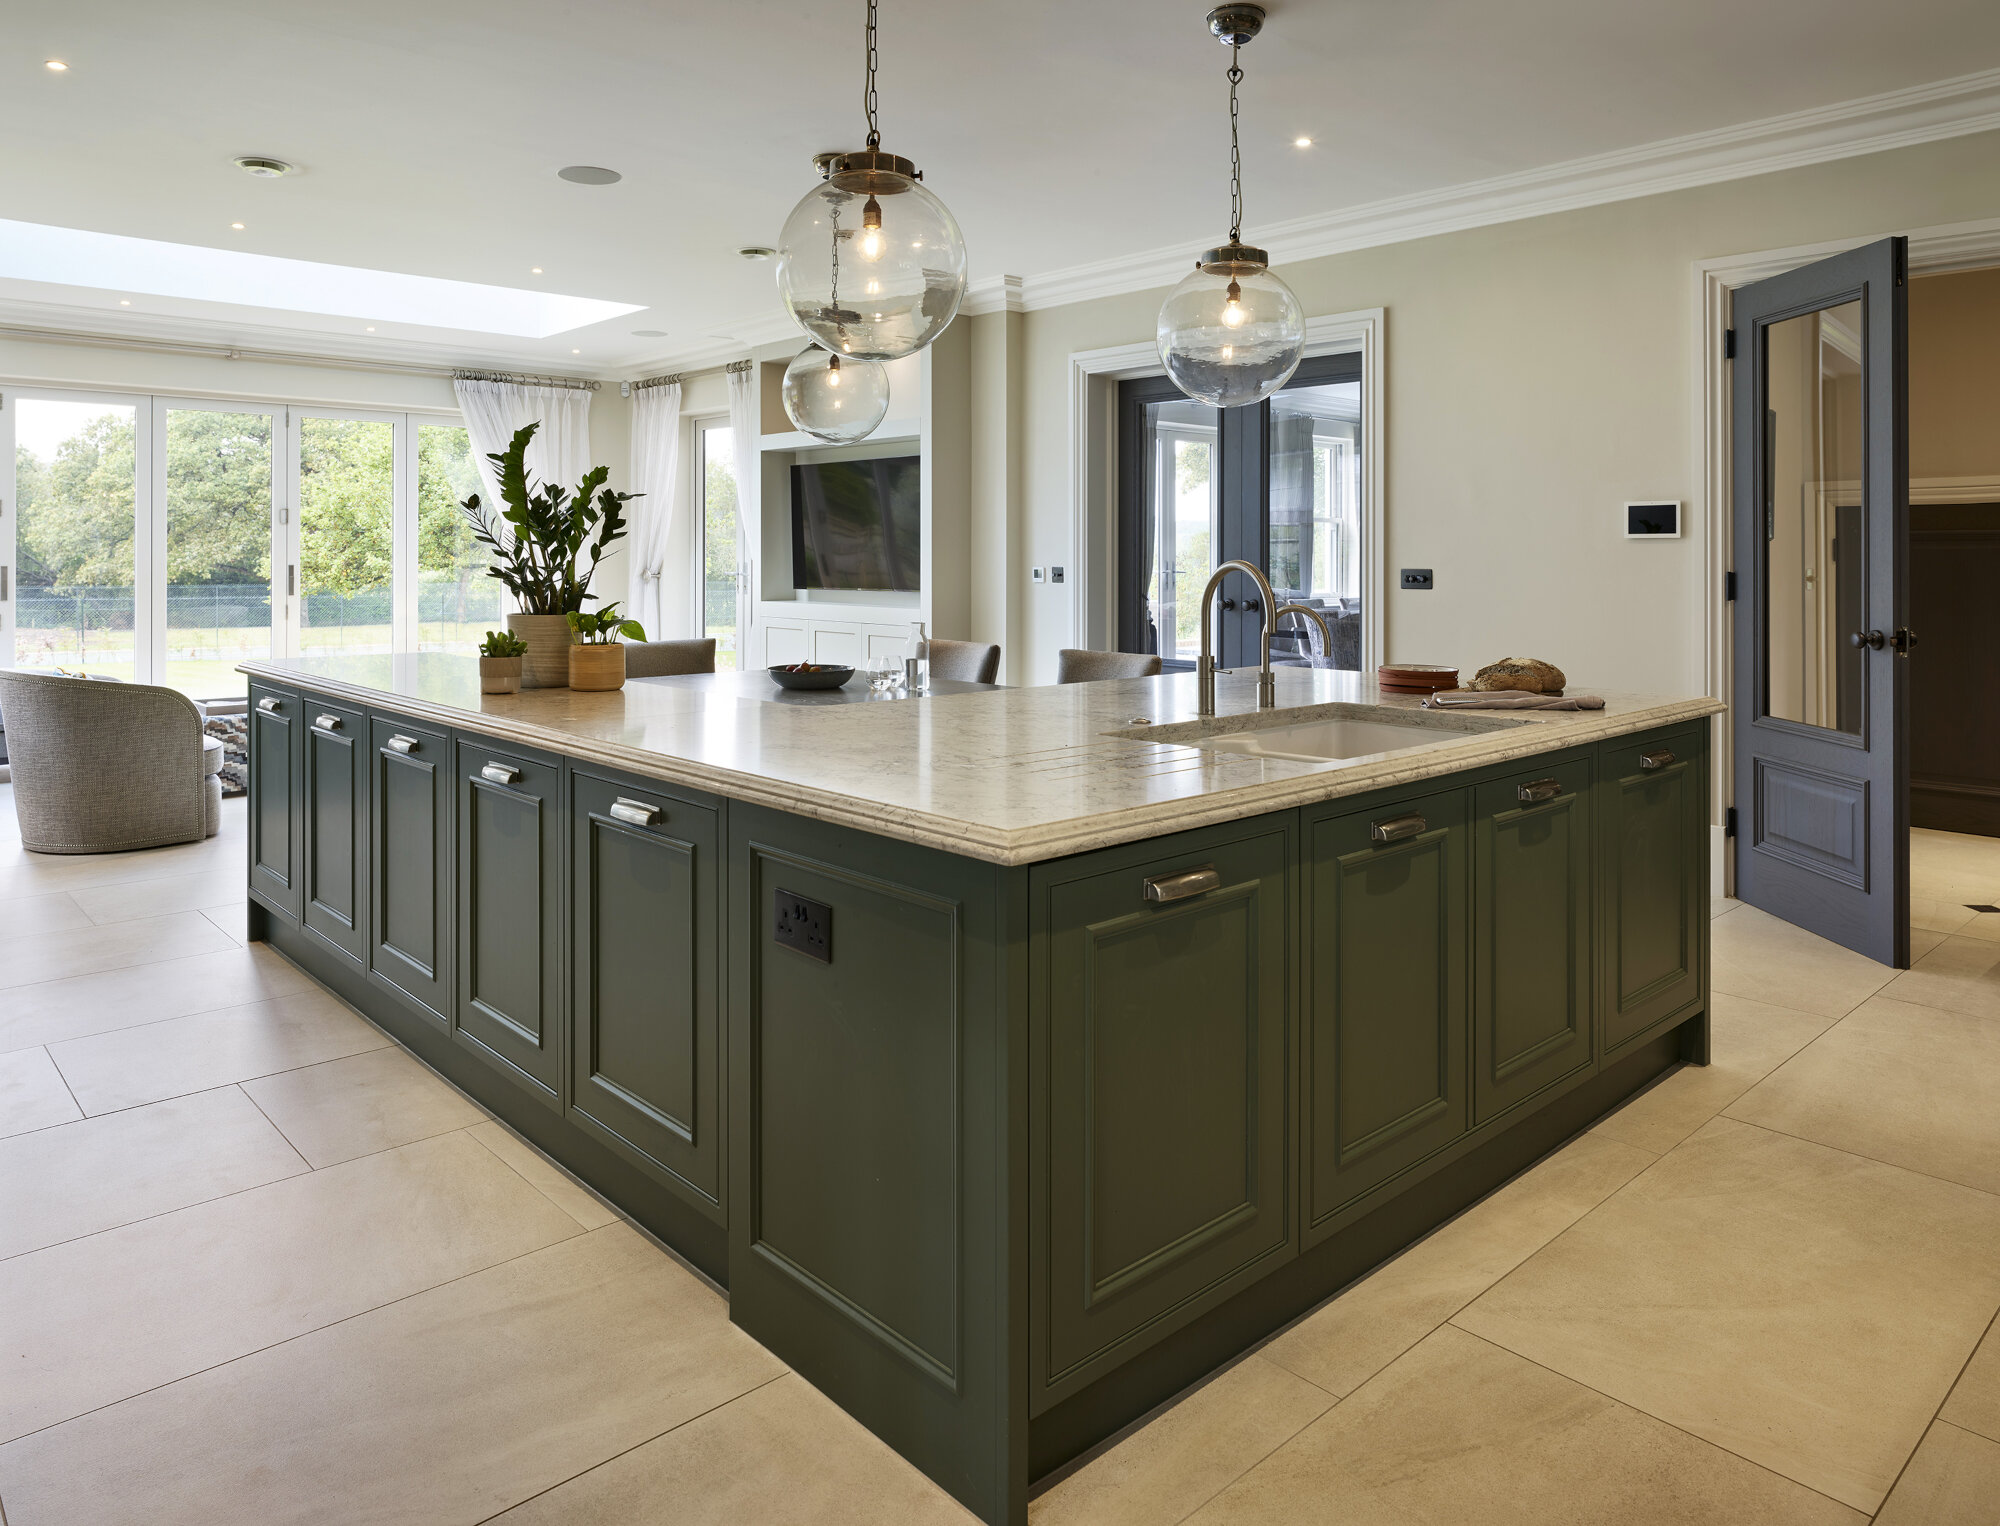 High End traditional Kitchens In Southwell